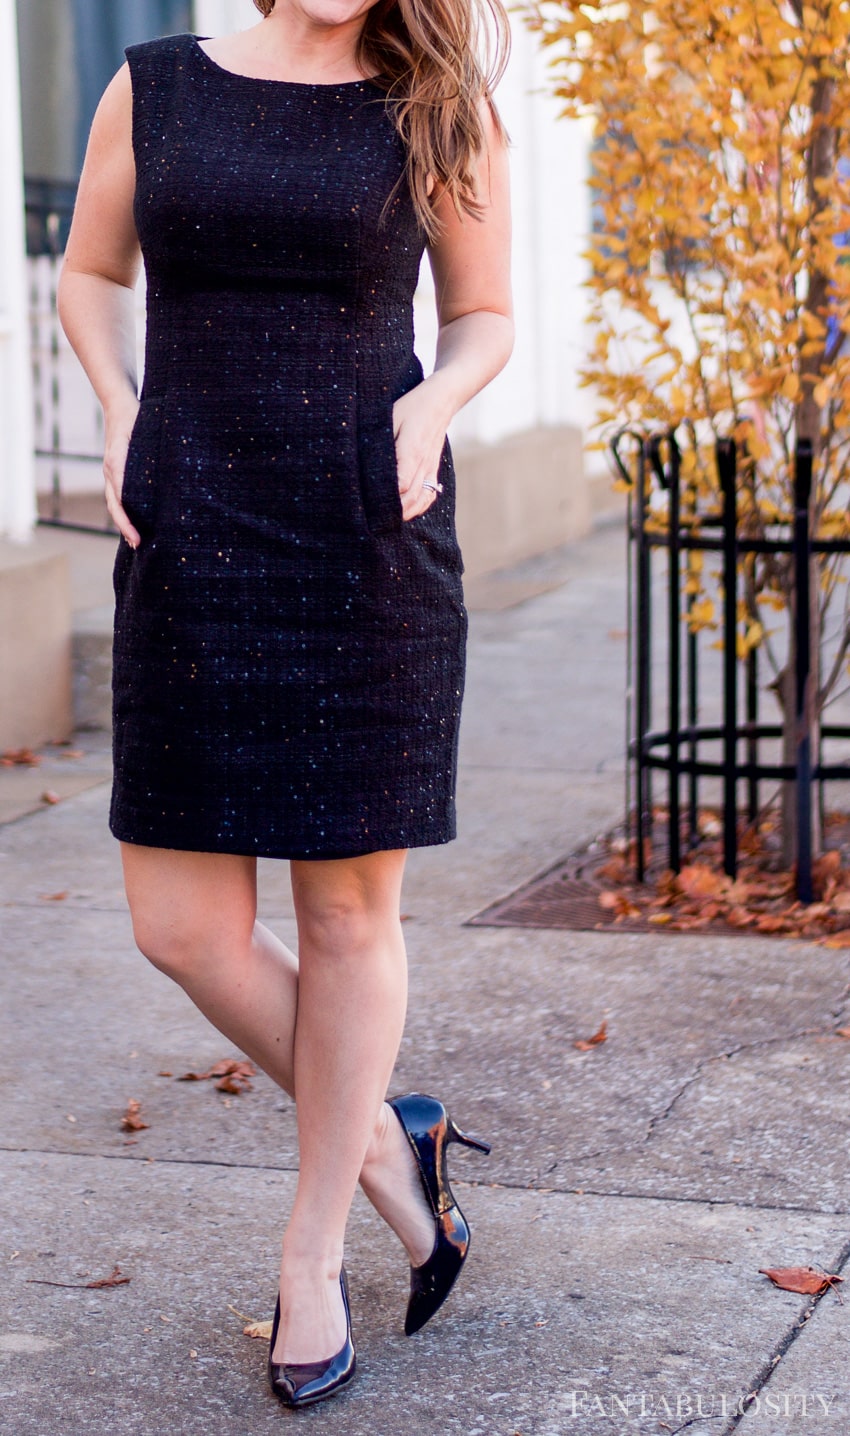 Holiday Black Dress - Macy's Anne Klein Sequined Sheath Dress for a holiday gathering or event